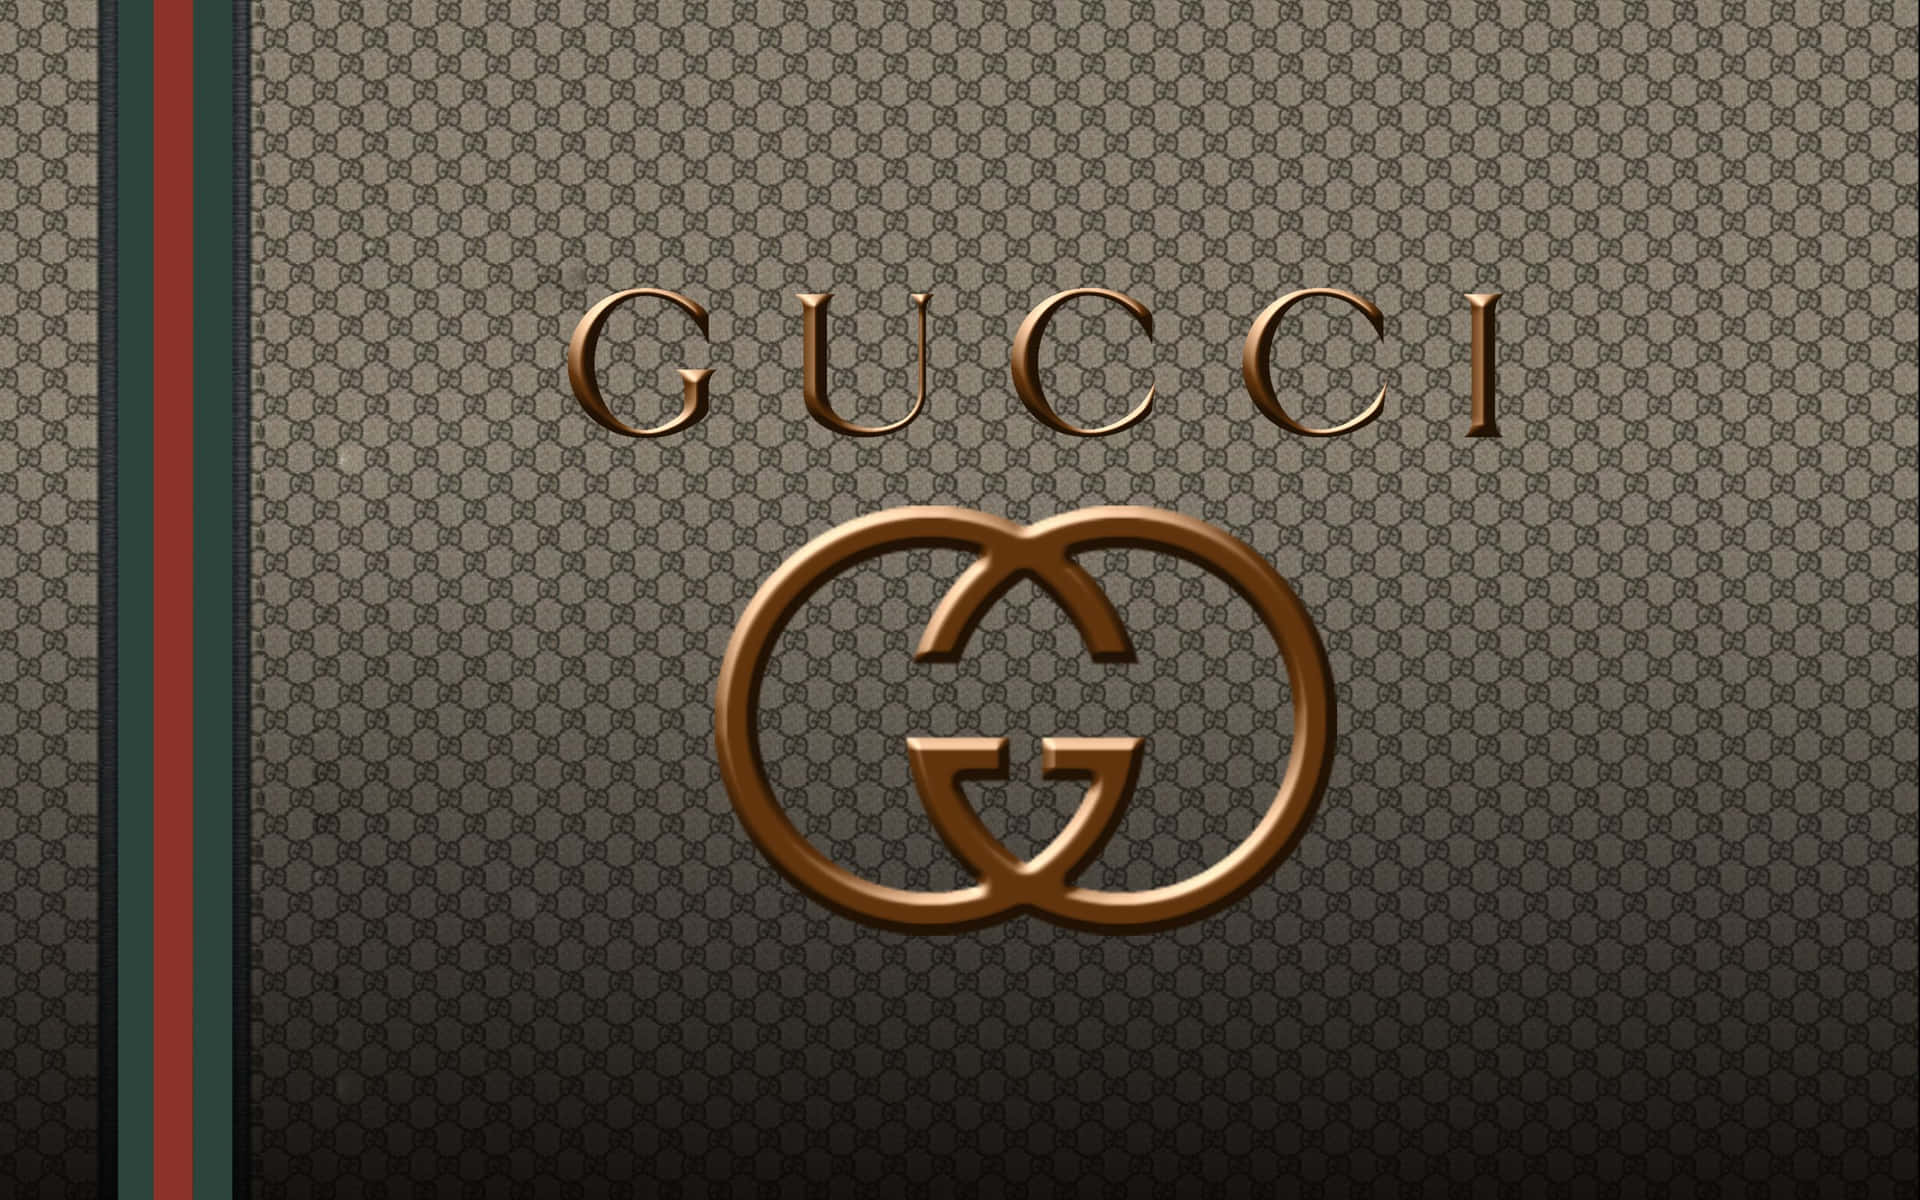 Exquisite Style Of Gucci Fashion Brand Background